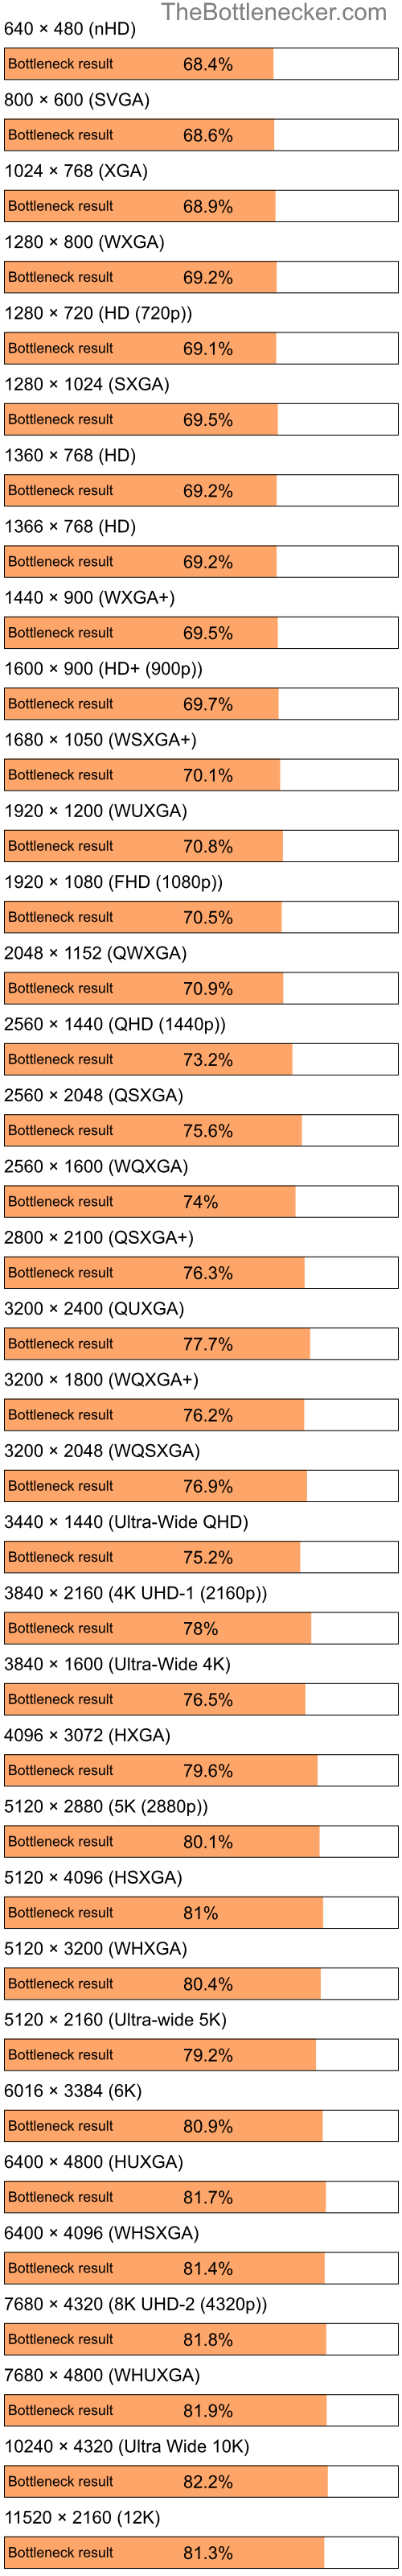 Bottleneck results by resolution for Intel Celeron and AMD Radeon HD 6250 in Graphic Card Intense Tasks